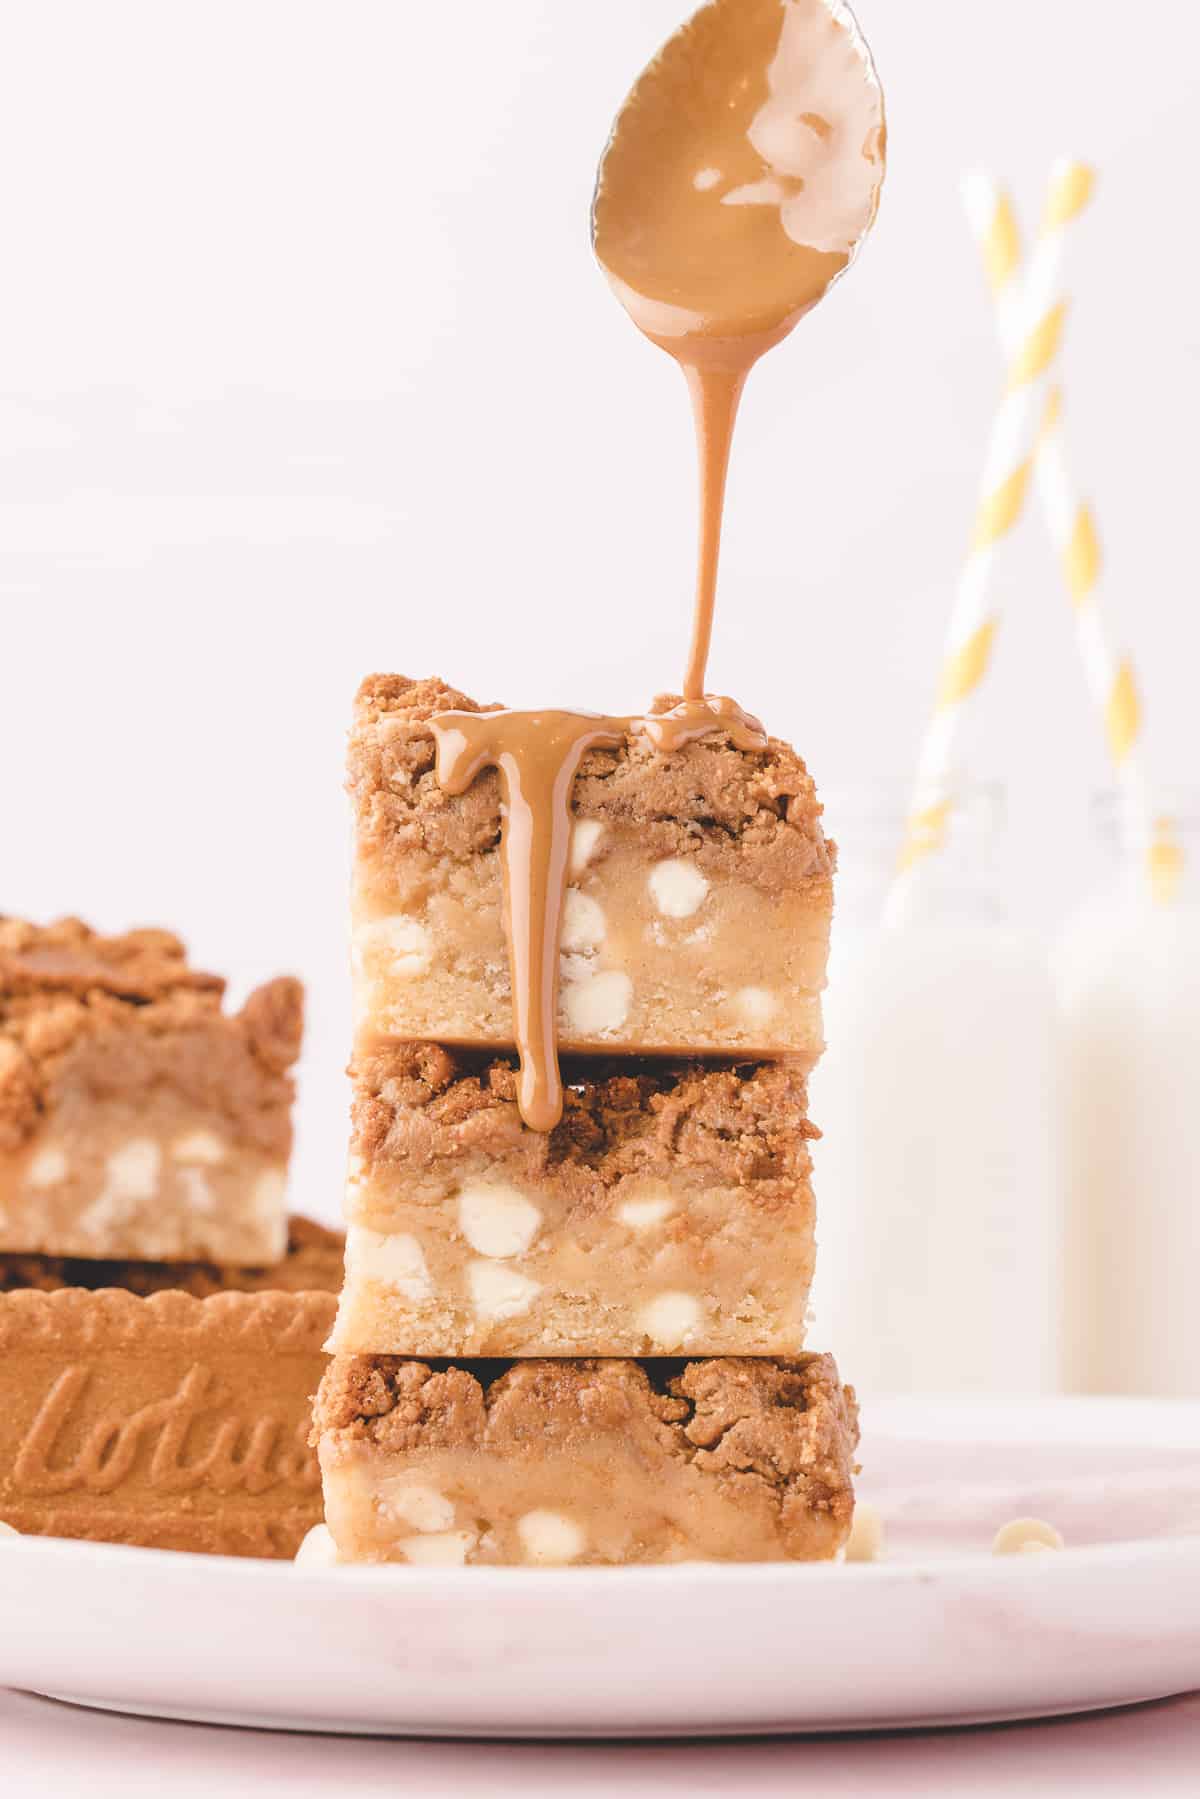 Hand pouring a spoon of biscoff spread over 3 stacked bars. 